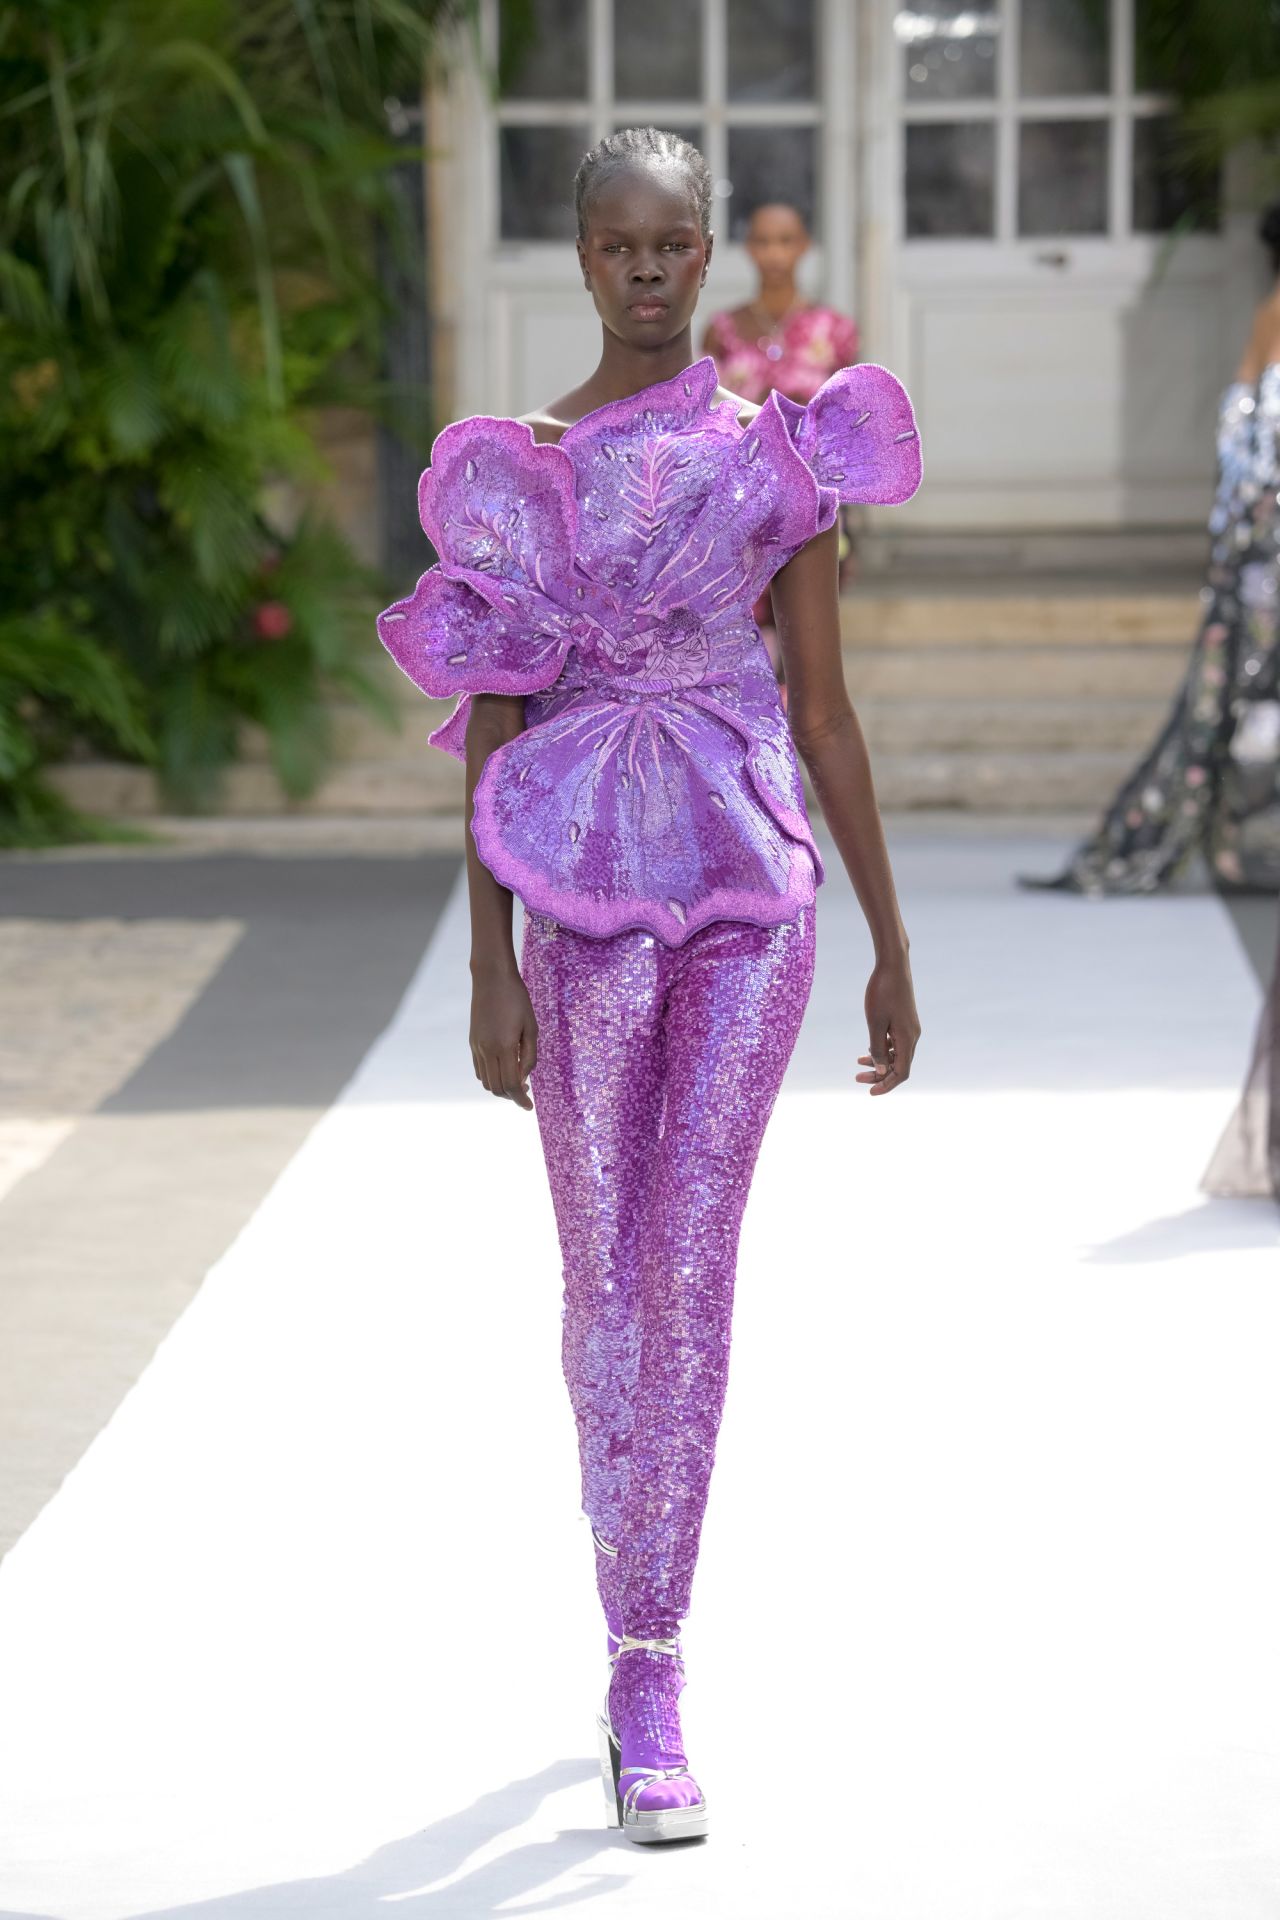 PARIS, FRANCE - JULY 03: (EDITORIAL USE ONLY - For Non-Editorial use please seek approval from Fashion House) A model walks the runway during the Rahul Mishra Haute Couture Fall/Winter 2023/2024 show as part of Paris Fashion Week on July 03, 2023 in Paris, France. (Photo by Kristy Sparow/Getty Images)